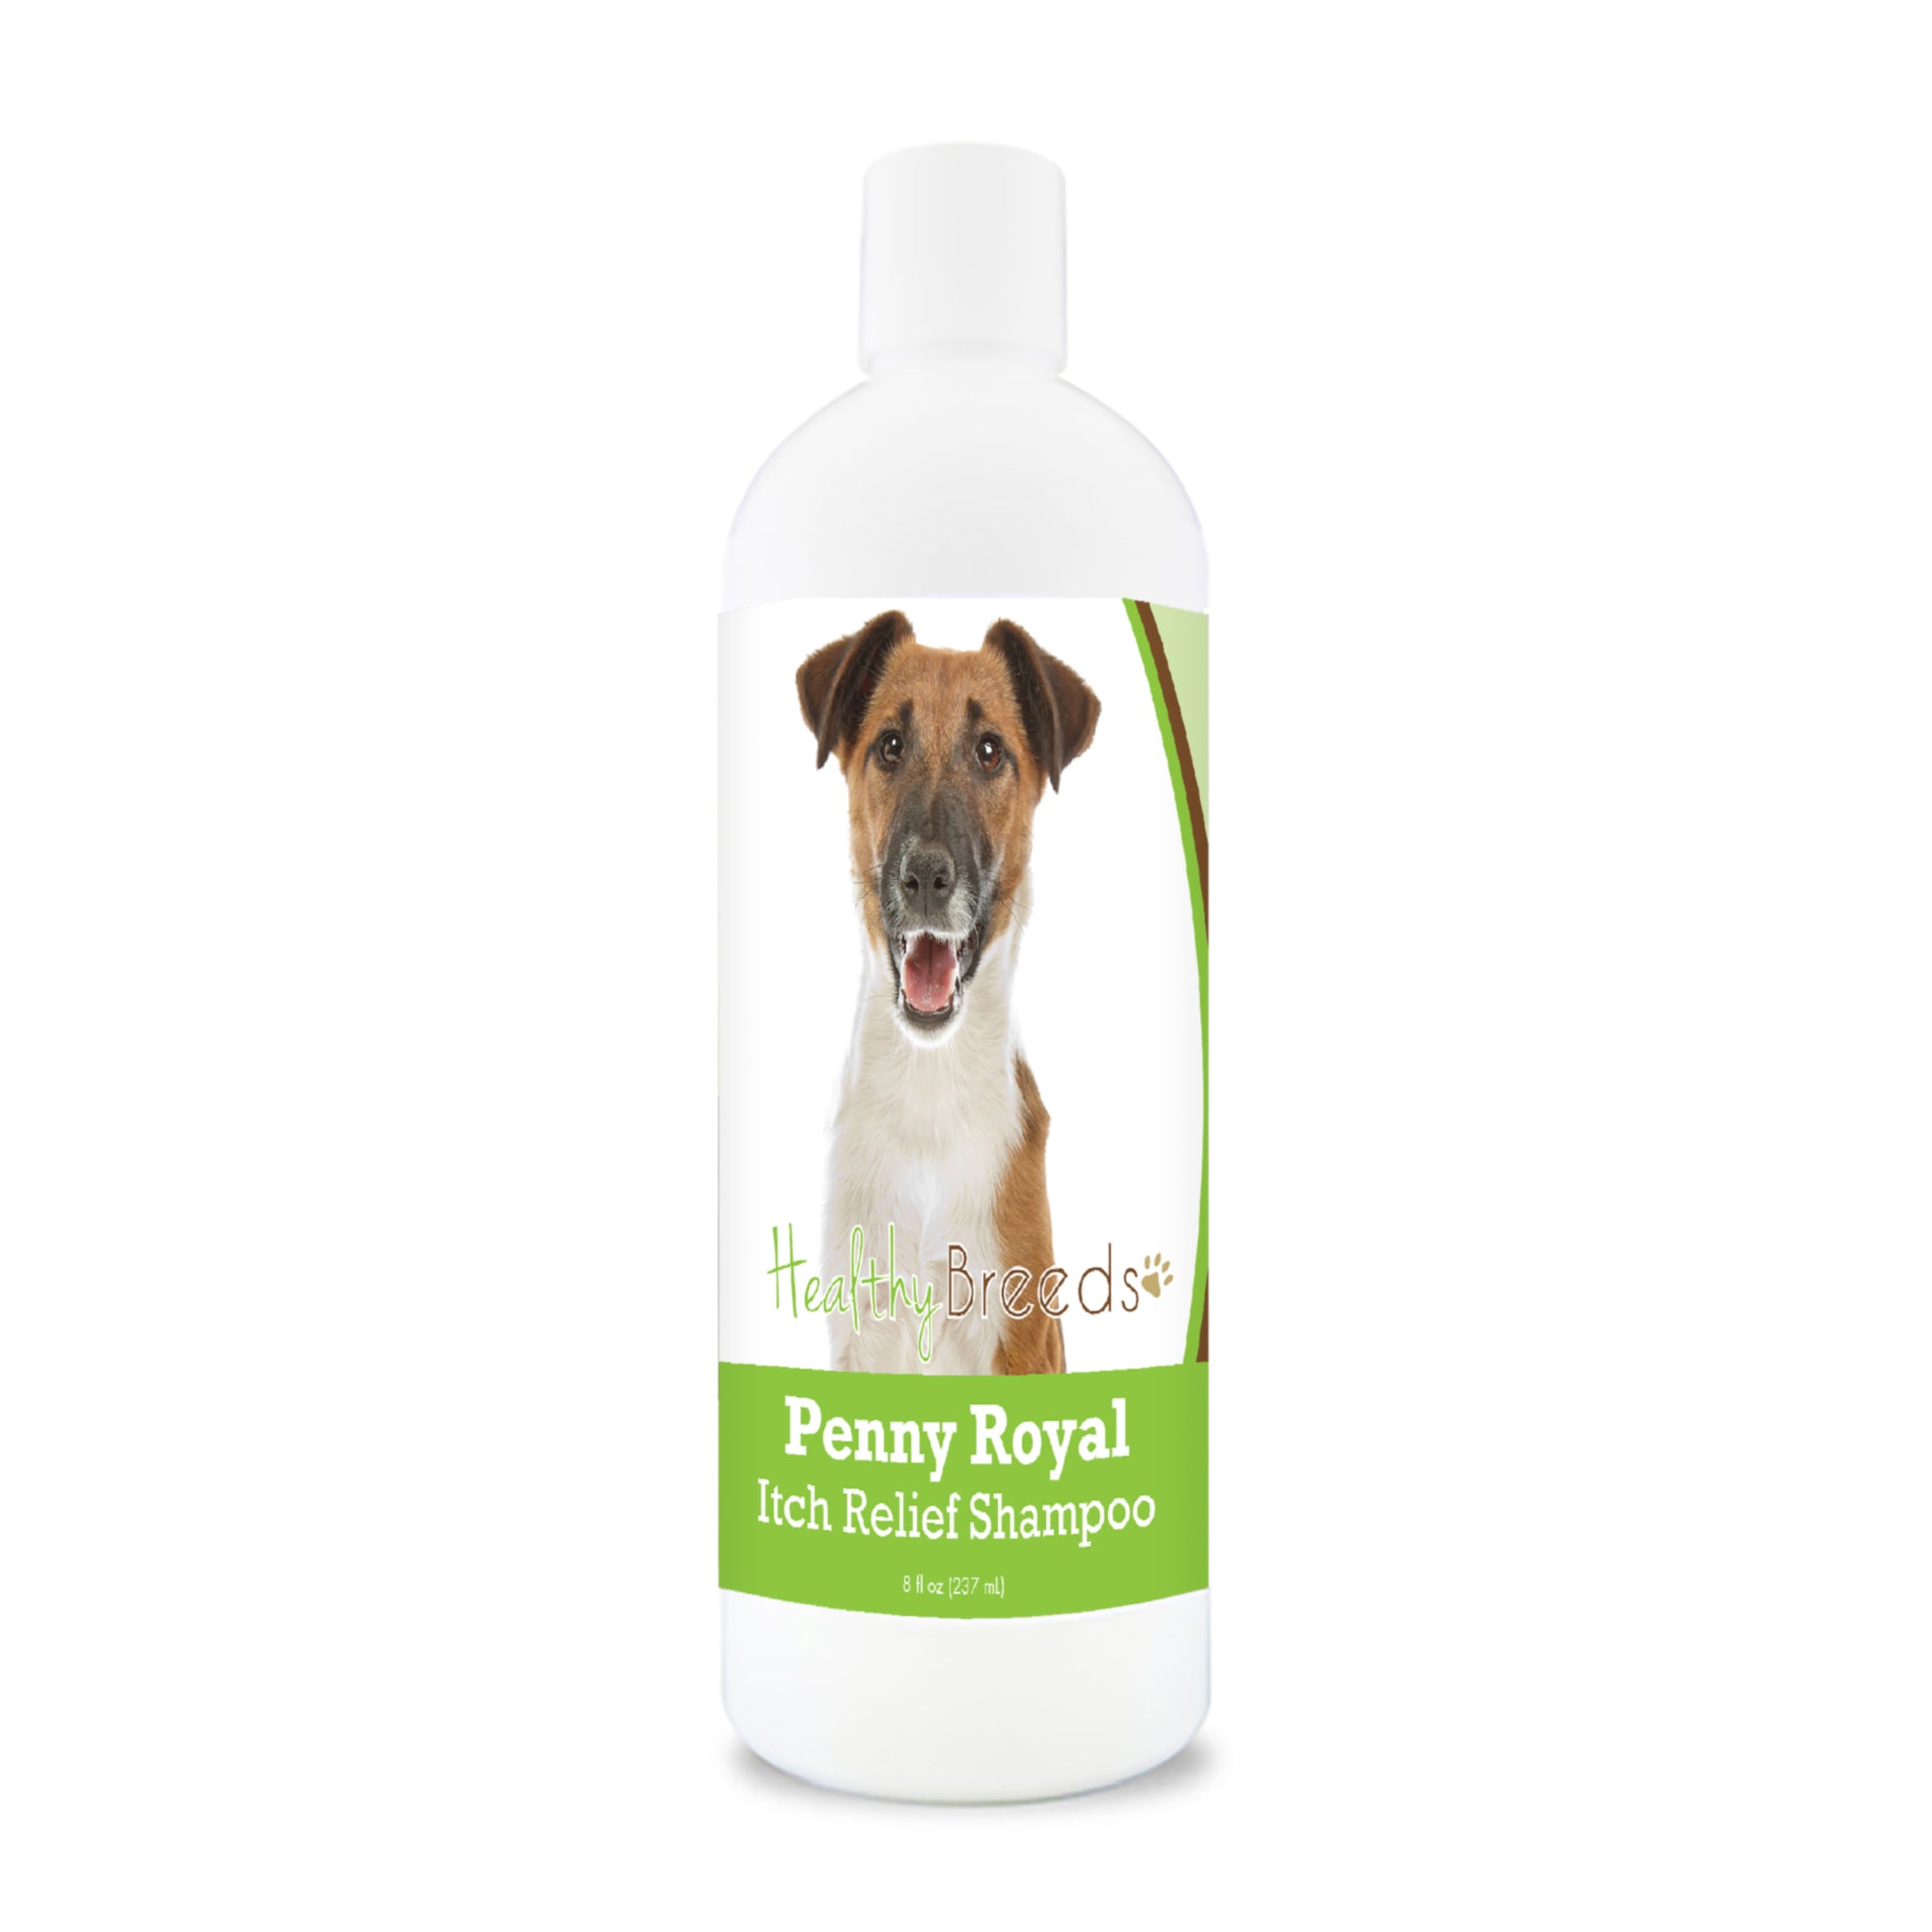 Smooth Fox Terrier Penny Royal Itch Relief Shampoo 8 oz